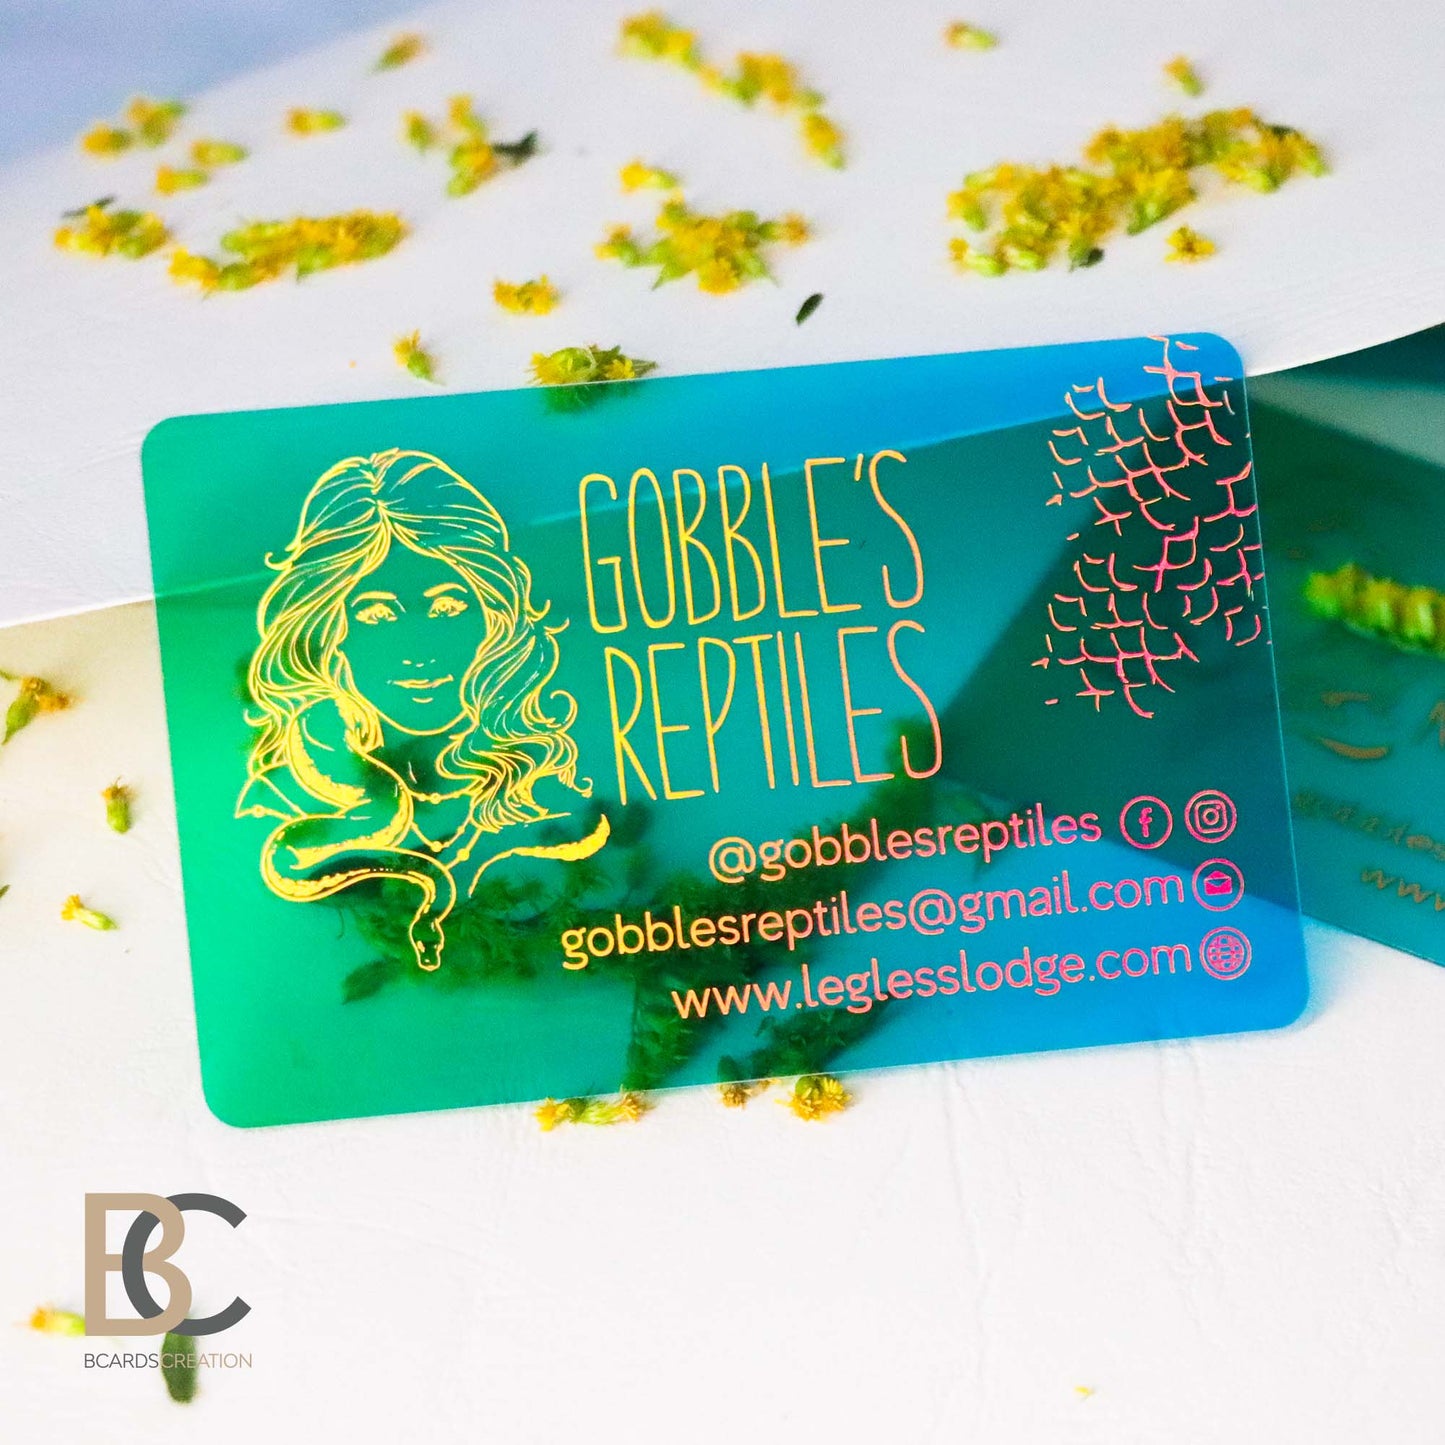 Waterproof Business Cards | Full color Clear Plastic Business Cards BcardsCreation